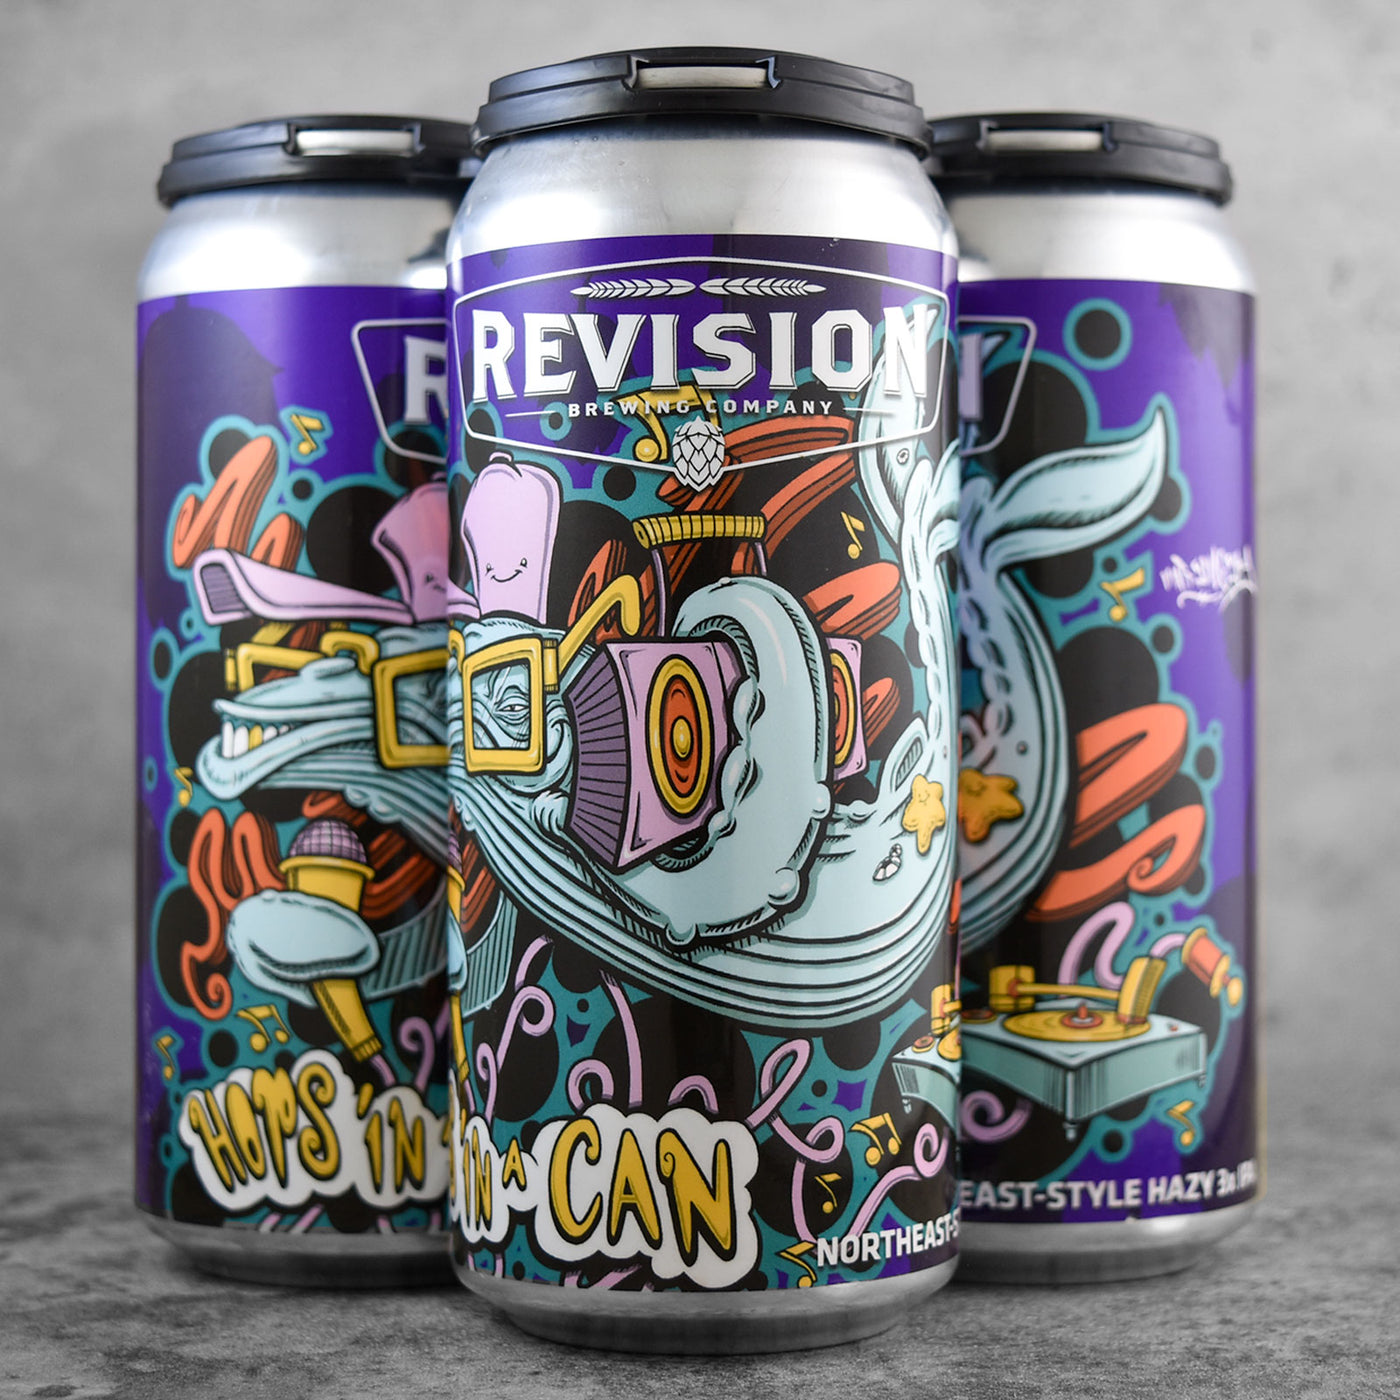 Revision Hops In A Can